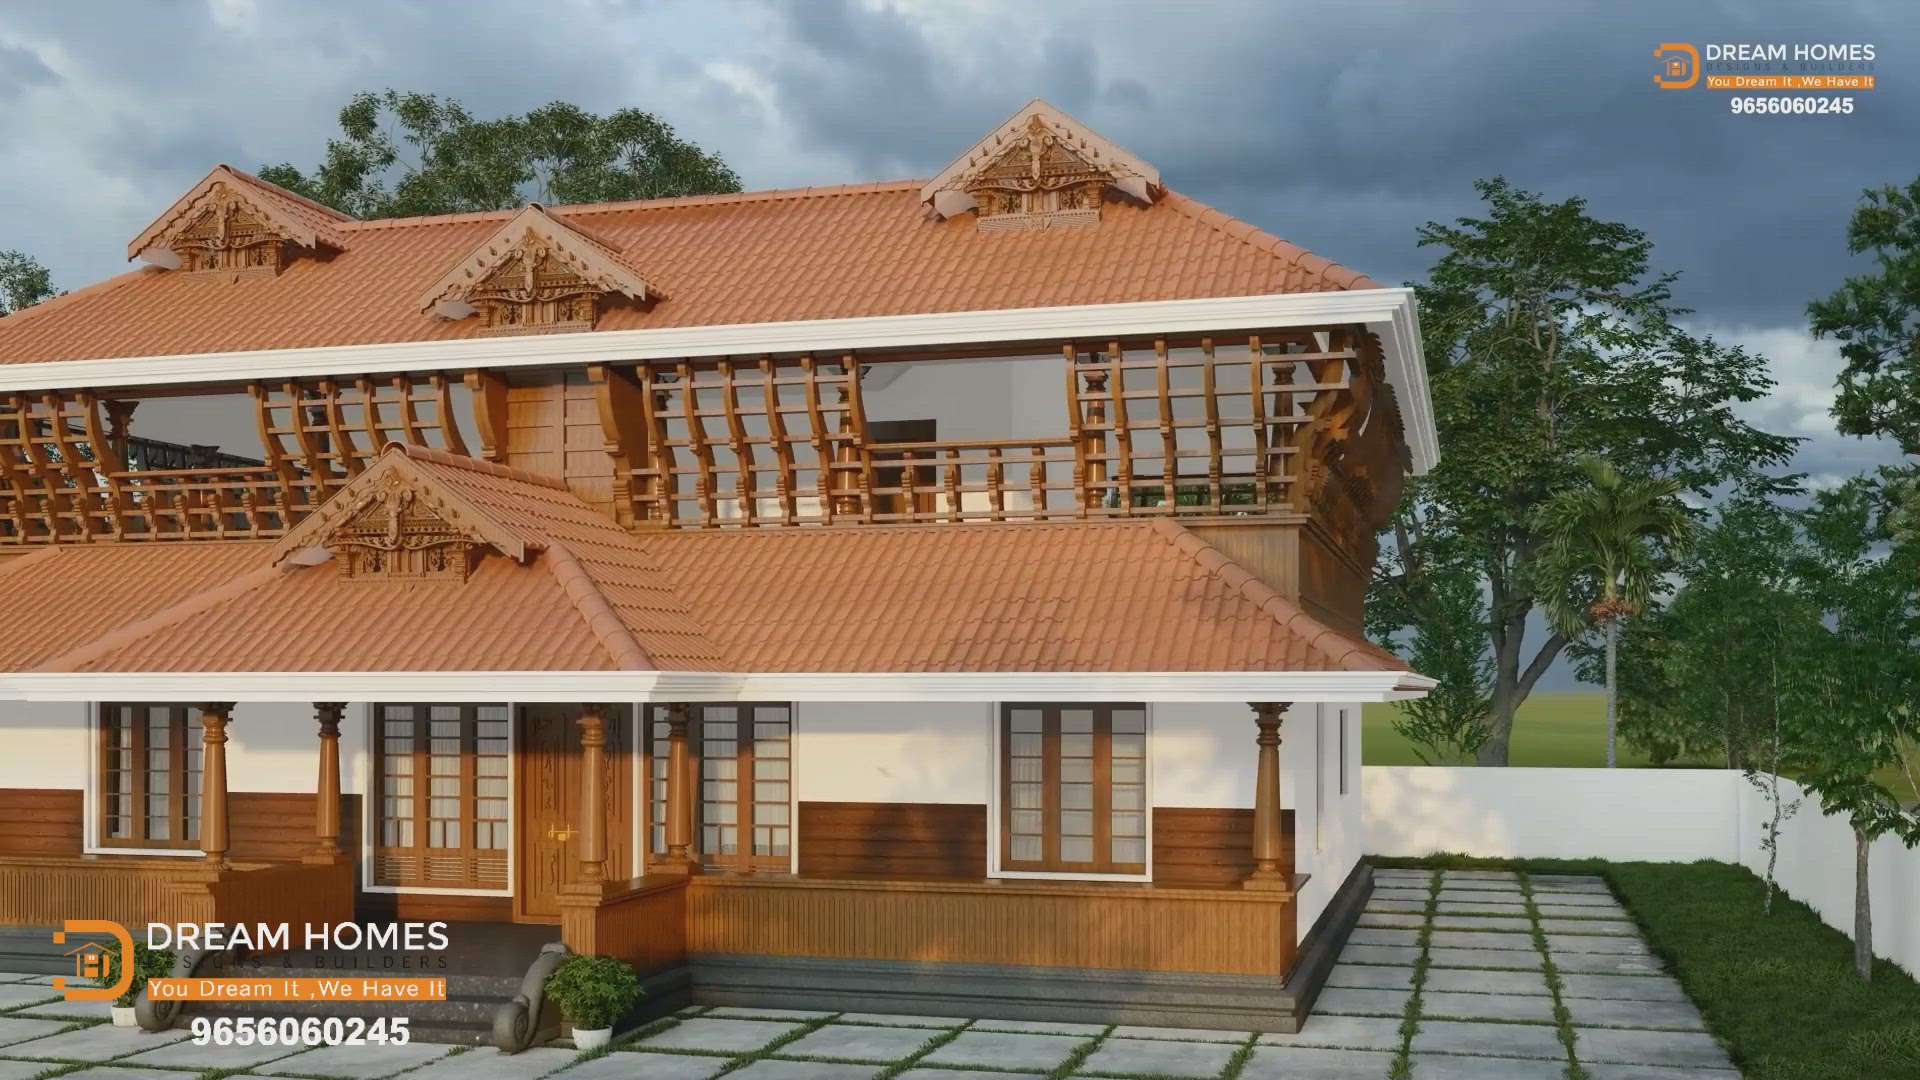 "DREAM HOMES DESIGNS & BUILDERS "
You Dream It, We Have It !
🙏2000 സ്‌ക്വയർ ഫീറ്റിൽ ഒരു നാലുകെട്ട് വീട് ചോറ്റാനിക്കരക്ഷേത്രത്തിനരികിൽ 🙏അമ്മേ ശരണം 🌹🙏🌹
      MileStone for upcoming  succession of Dream Homes 
Please go through the musical session and enjoy the traditional vibe!

Spare yourself from the stress of construction, we assist you whenever needed. 
We have Customised Design Packages that Clients can choose what they need and require. 
We Offer :
=> House Construction & Renovation
=> Commercial Buildings, Apartments
=> Temple Construction in Geometry
=> Well Designed Vasthu Architecture
=>  Interior Designs 
=>  Loan Application 
=> Permits & Licenses 

We are providing service to all over India 
No Compromise on Quality, Sincerity & Efficiency.

For more info 
9656060245
7902453187